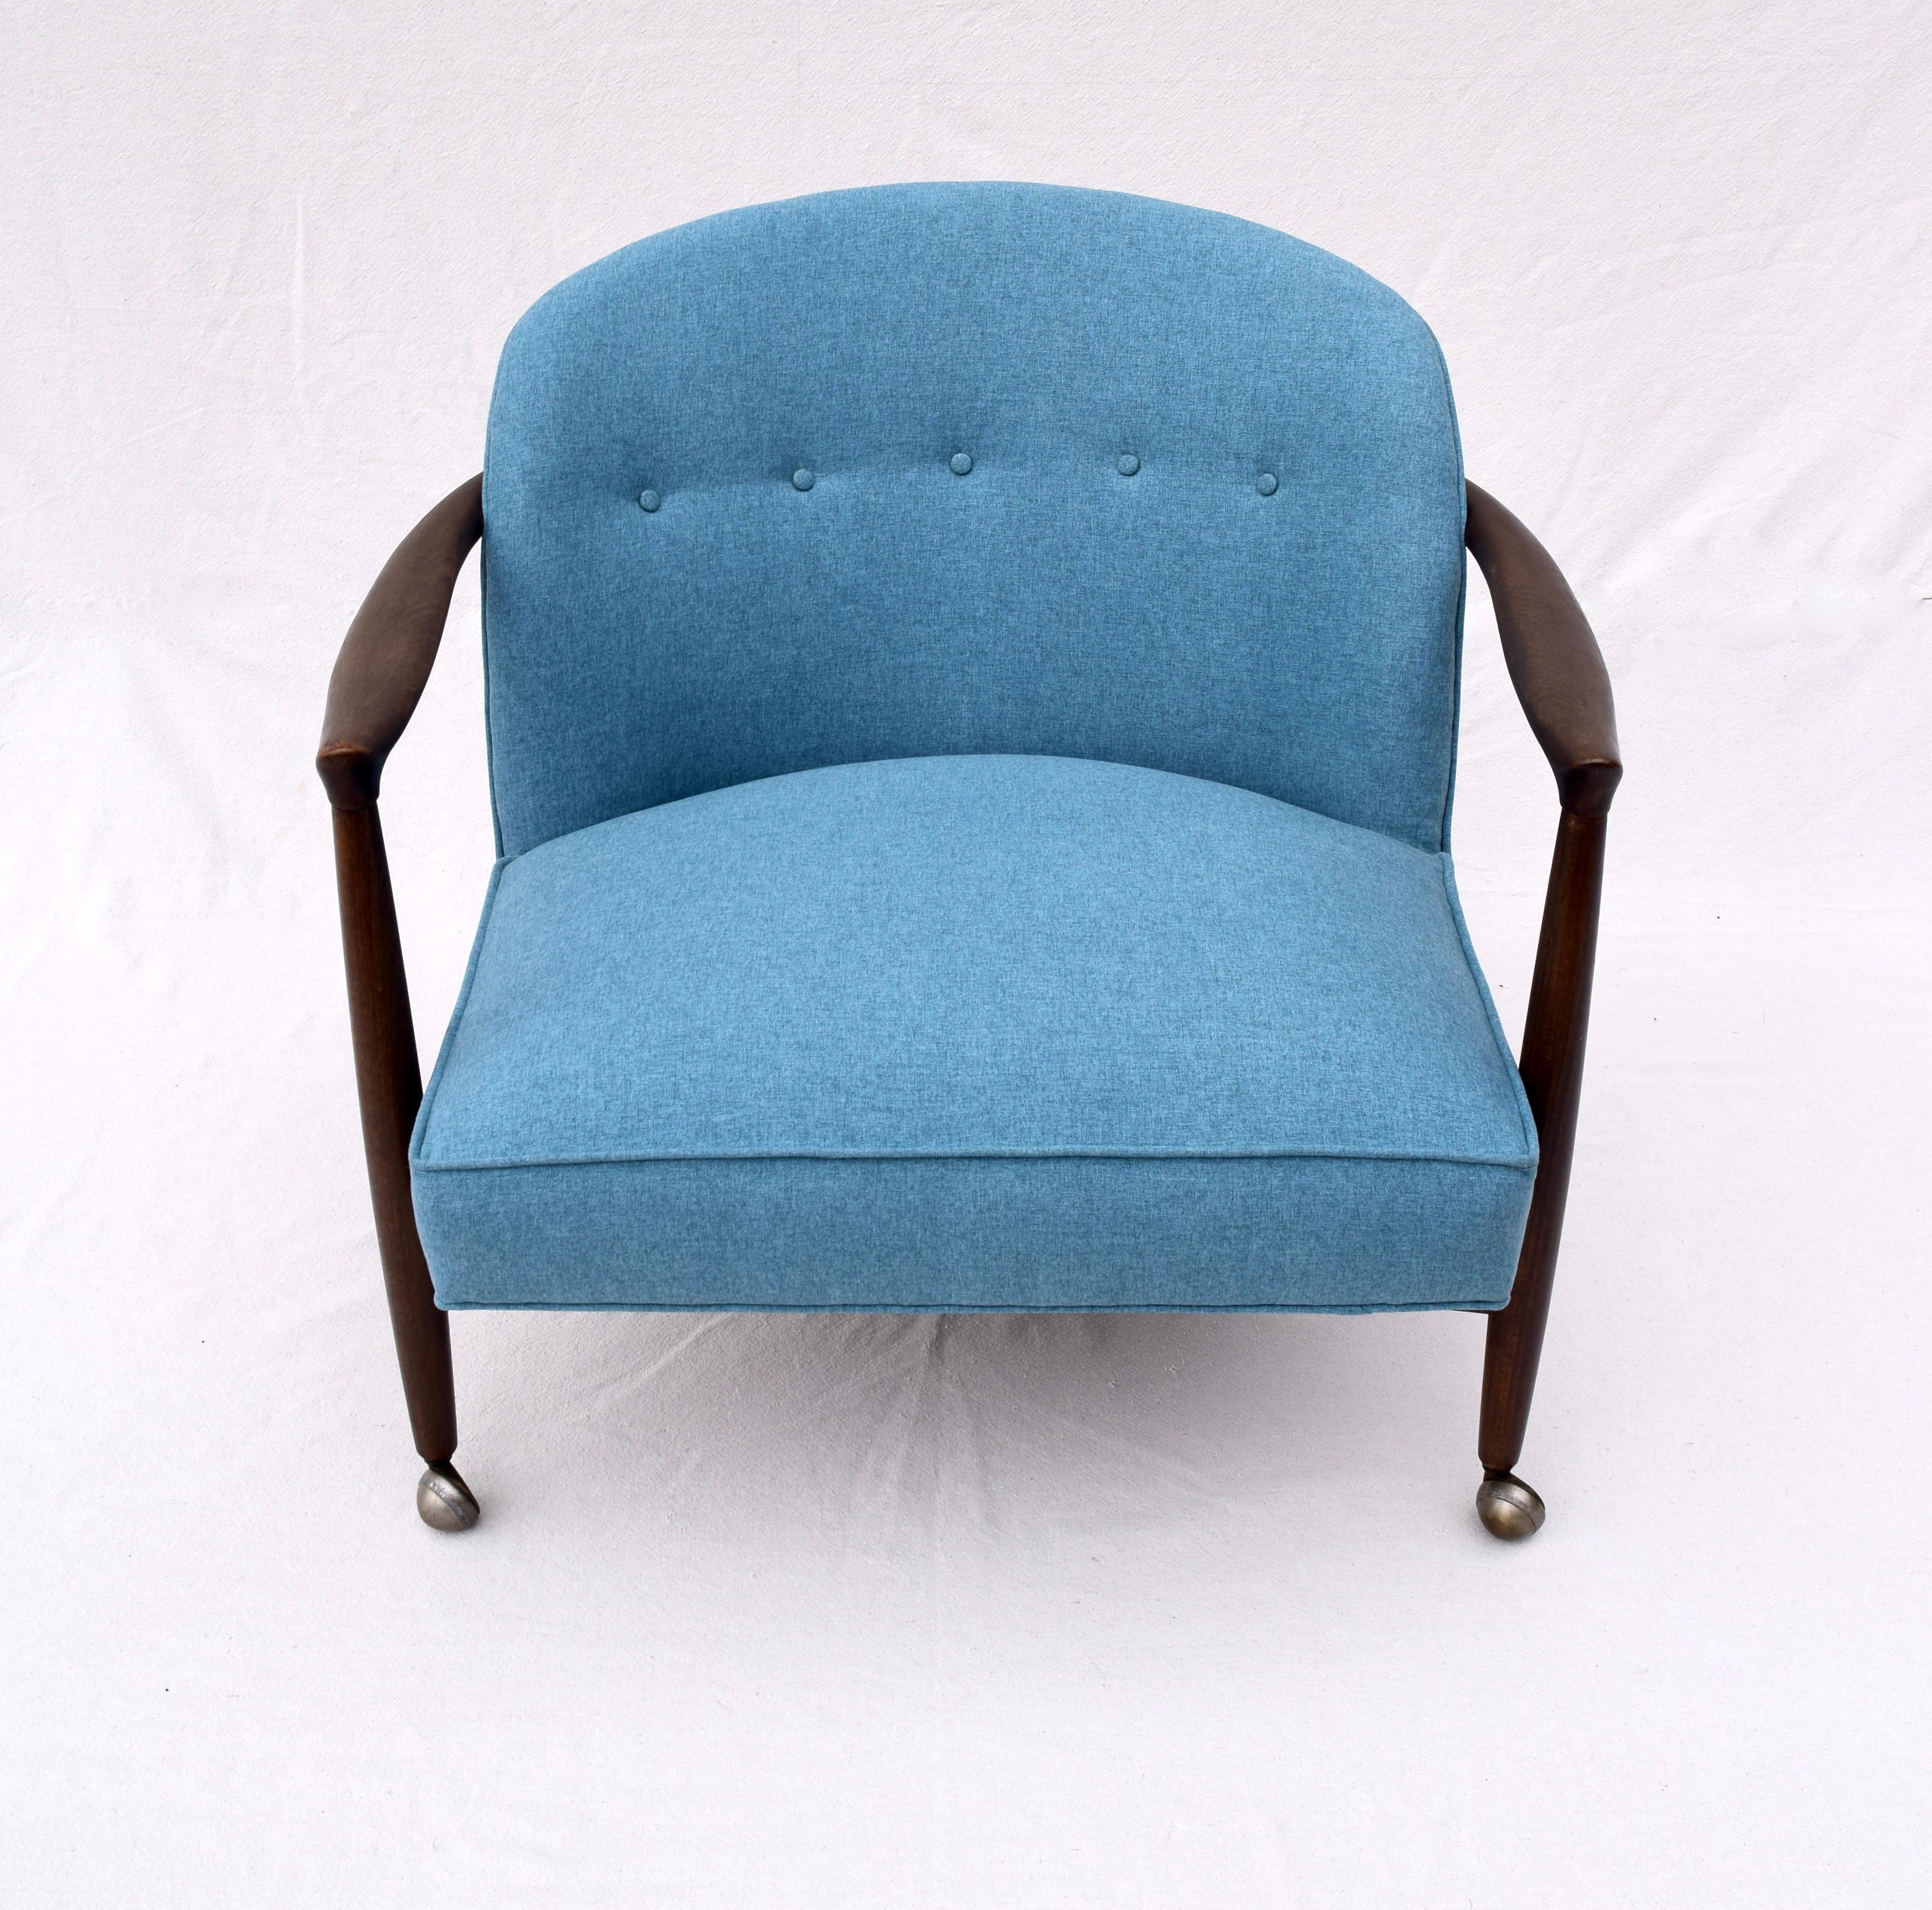 Finn Andersen for Selig Denmark sculpted barrel back lounge chair, circa 1960. Sculpted walnut hand waxed frame with original finish and warm patina upholstered in vibrant blue brushed felt. Original orbit casters on front legs designed for simple